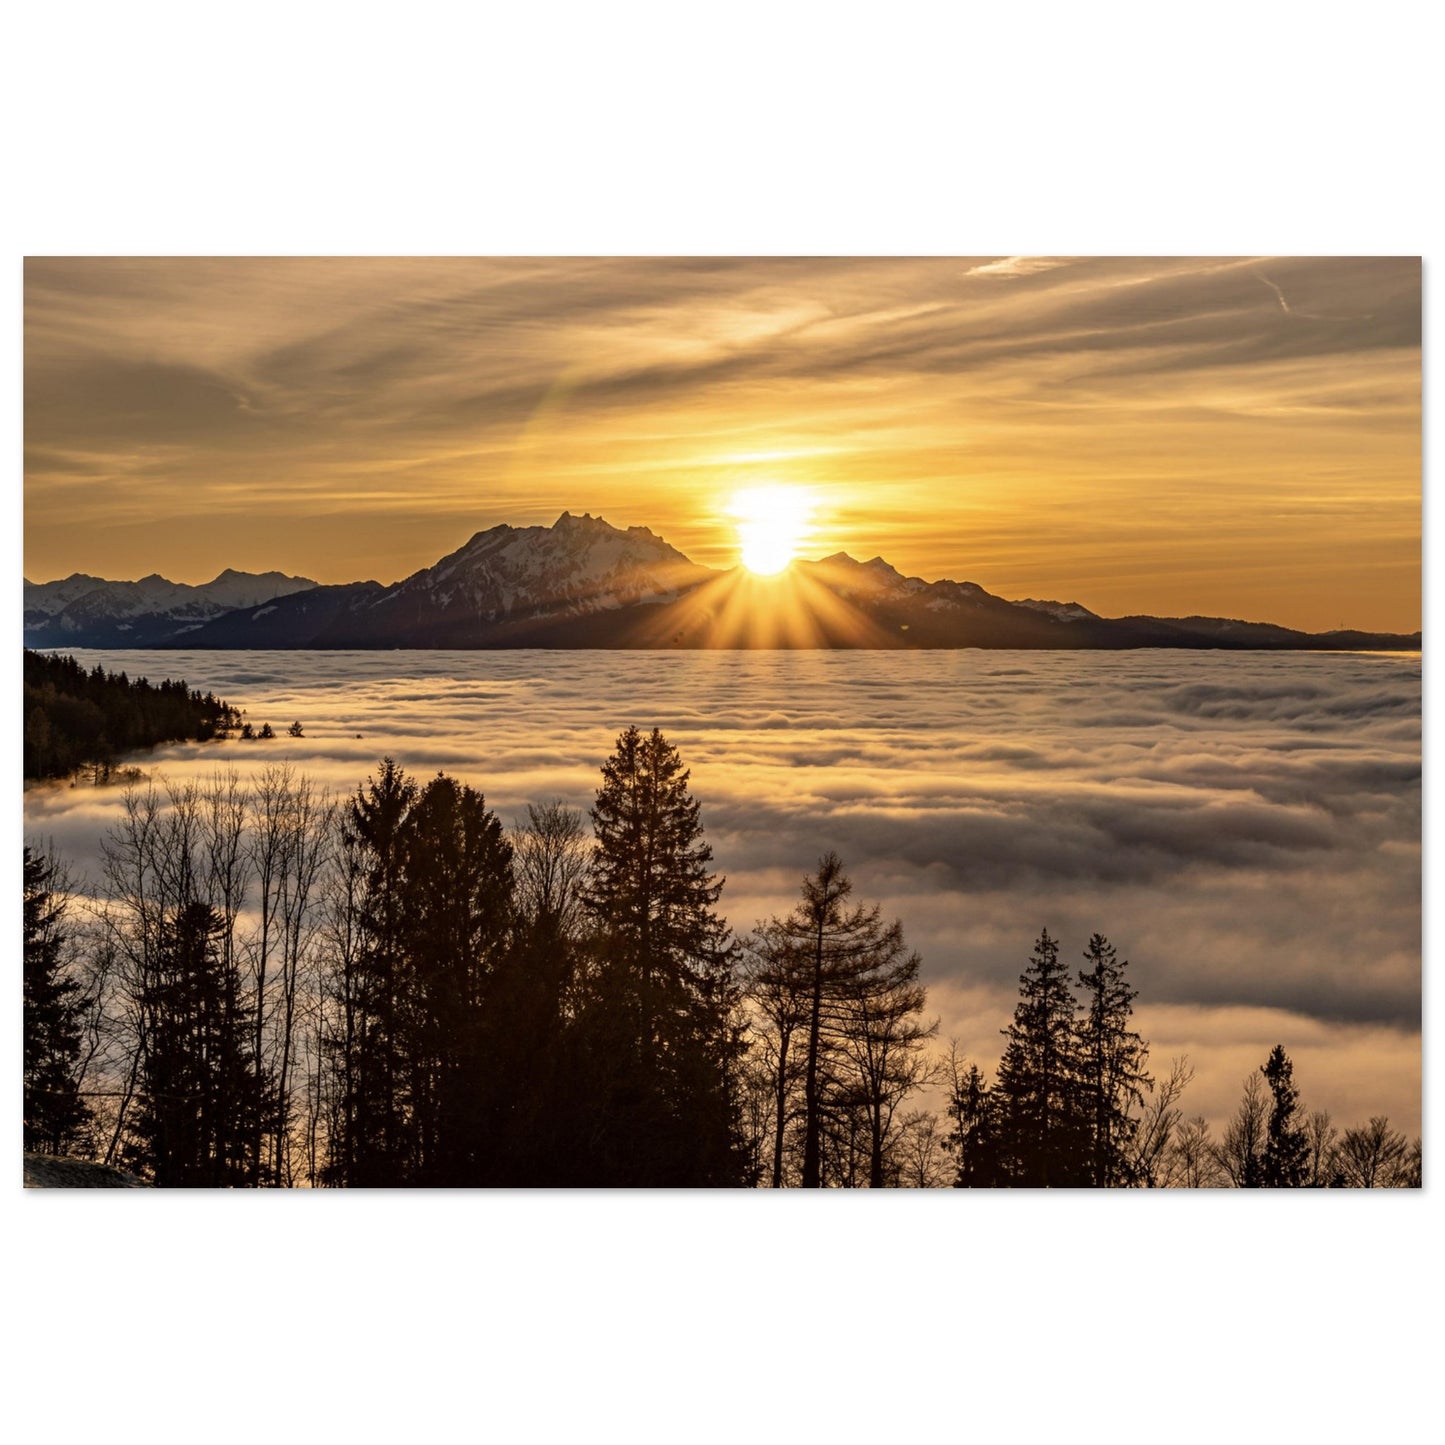 Sea of ​​fog sunset as a forex print